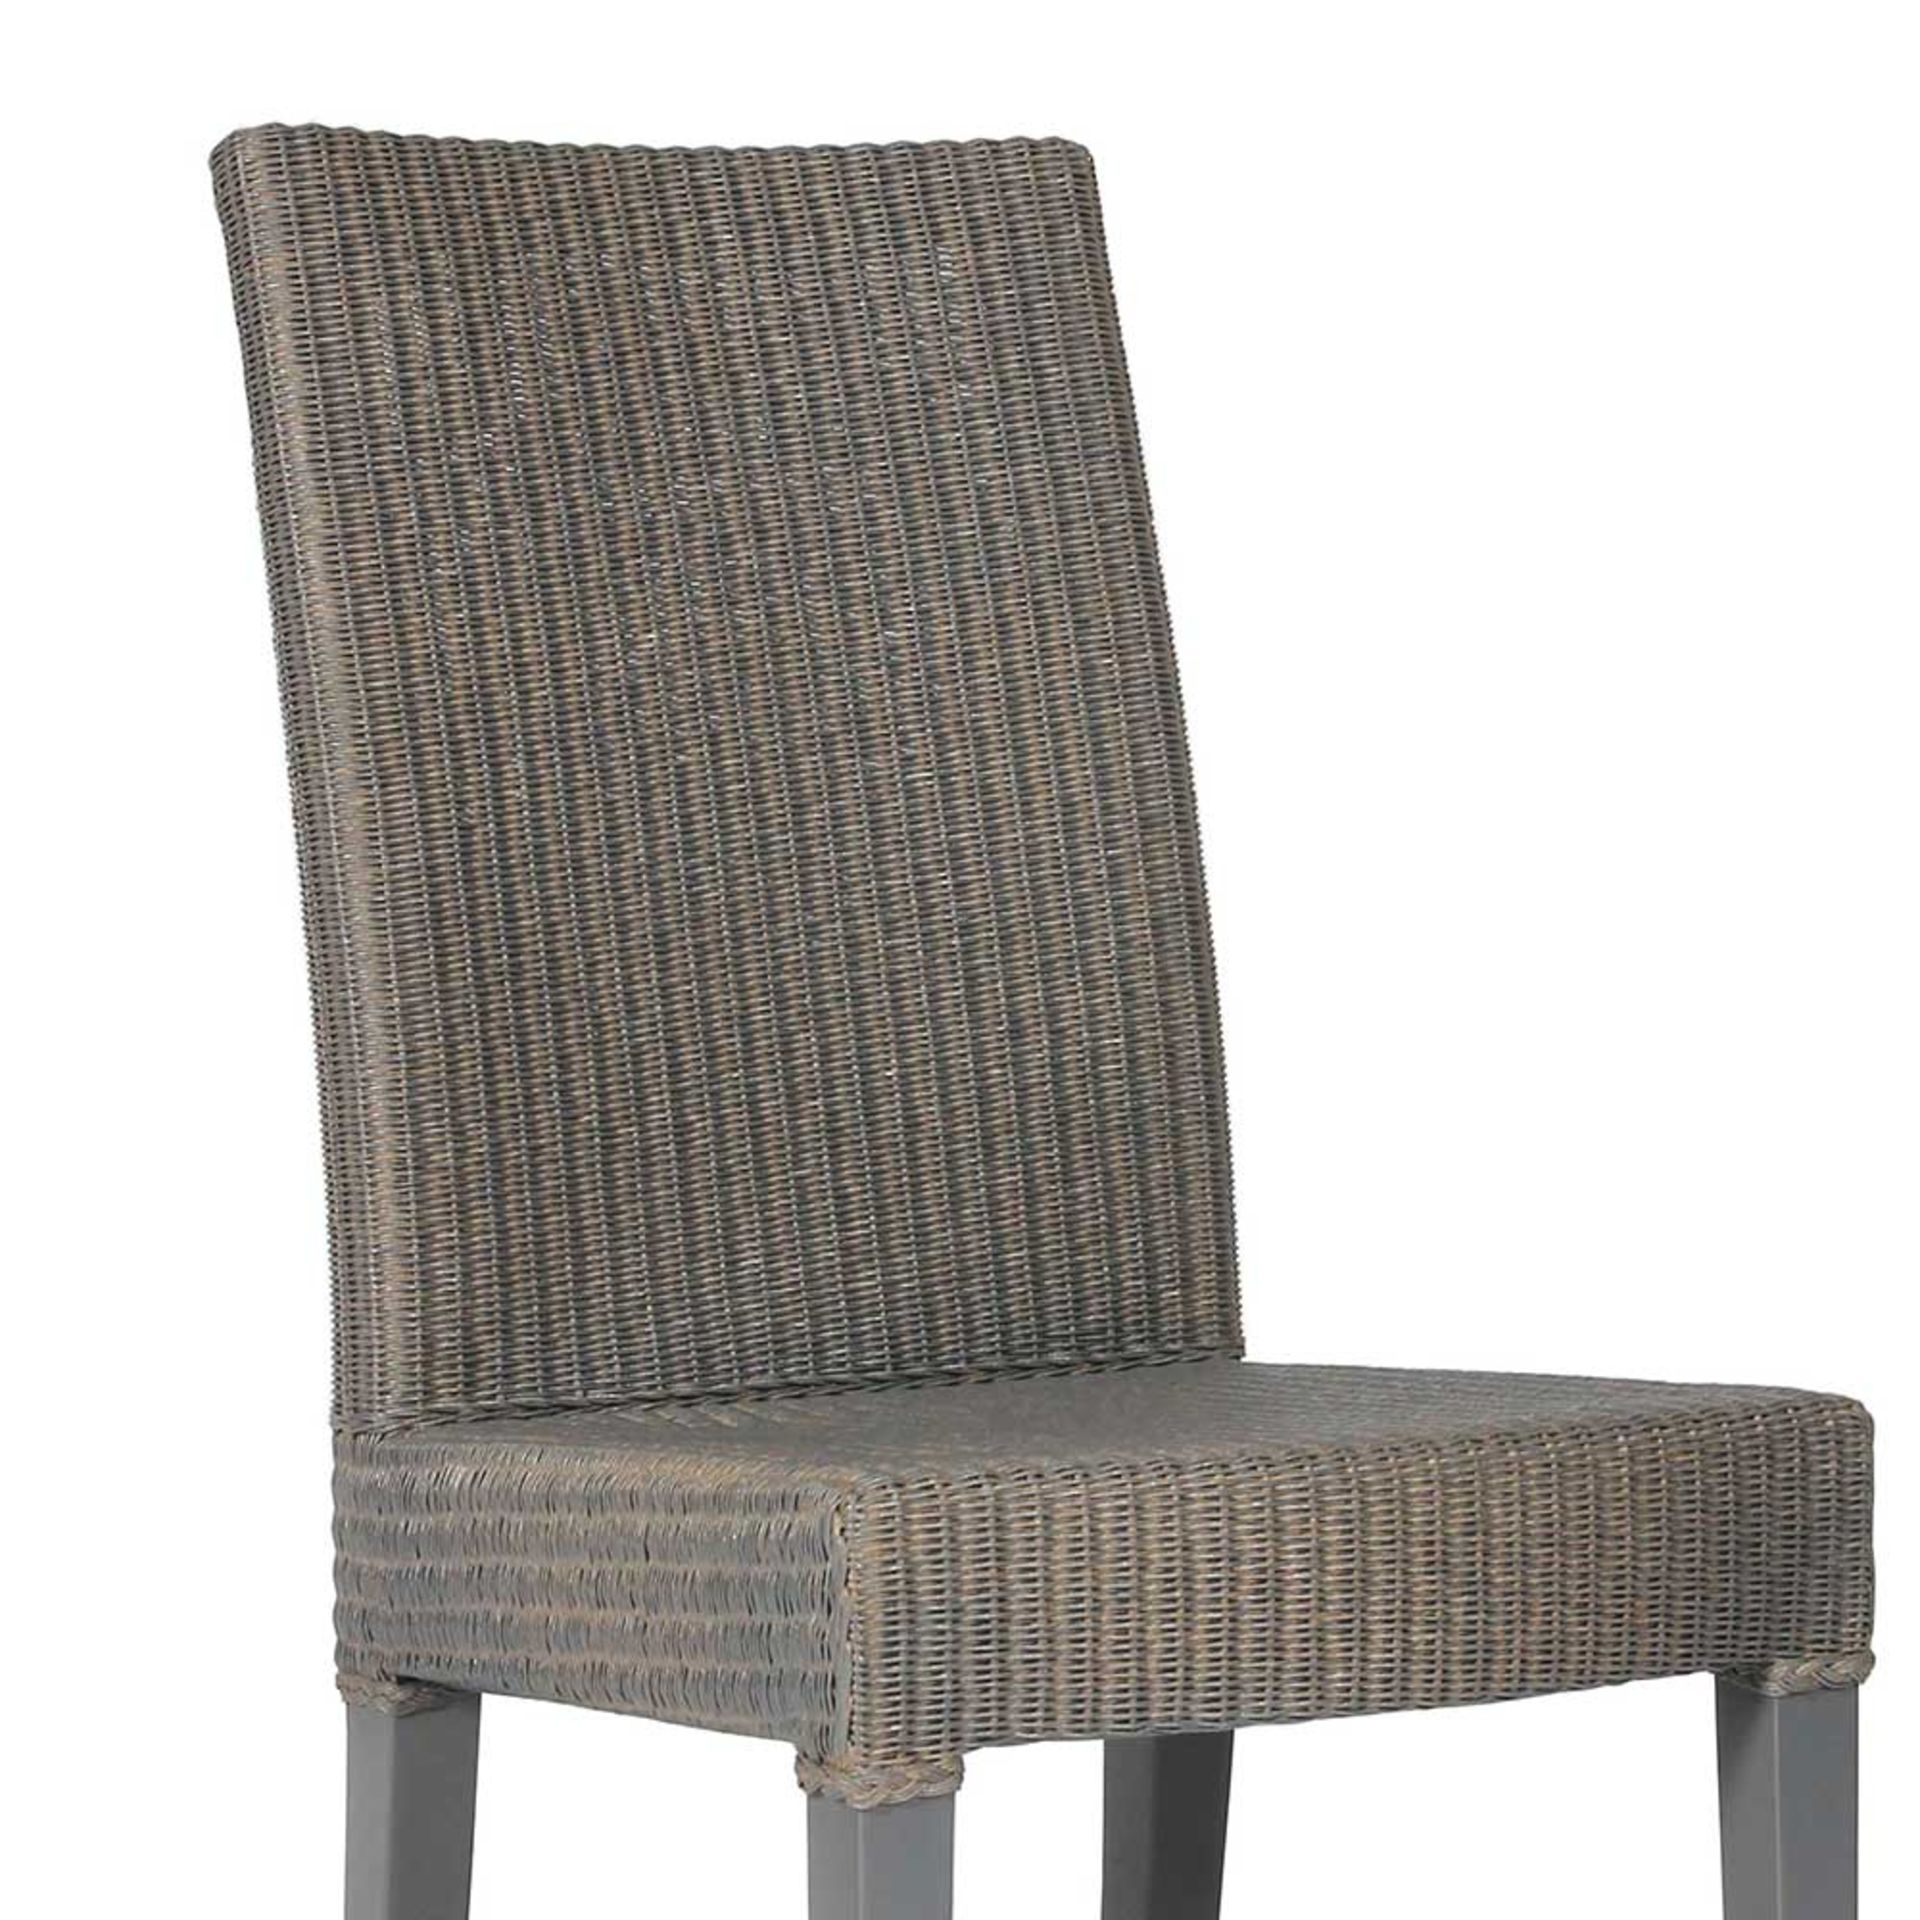 4 x Lina Two Tone Lloyd Loom Woven Dining Chairs - Contemporary Dining Chair Set - RRP £792! - Image 7 of 7